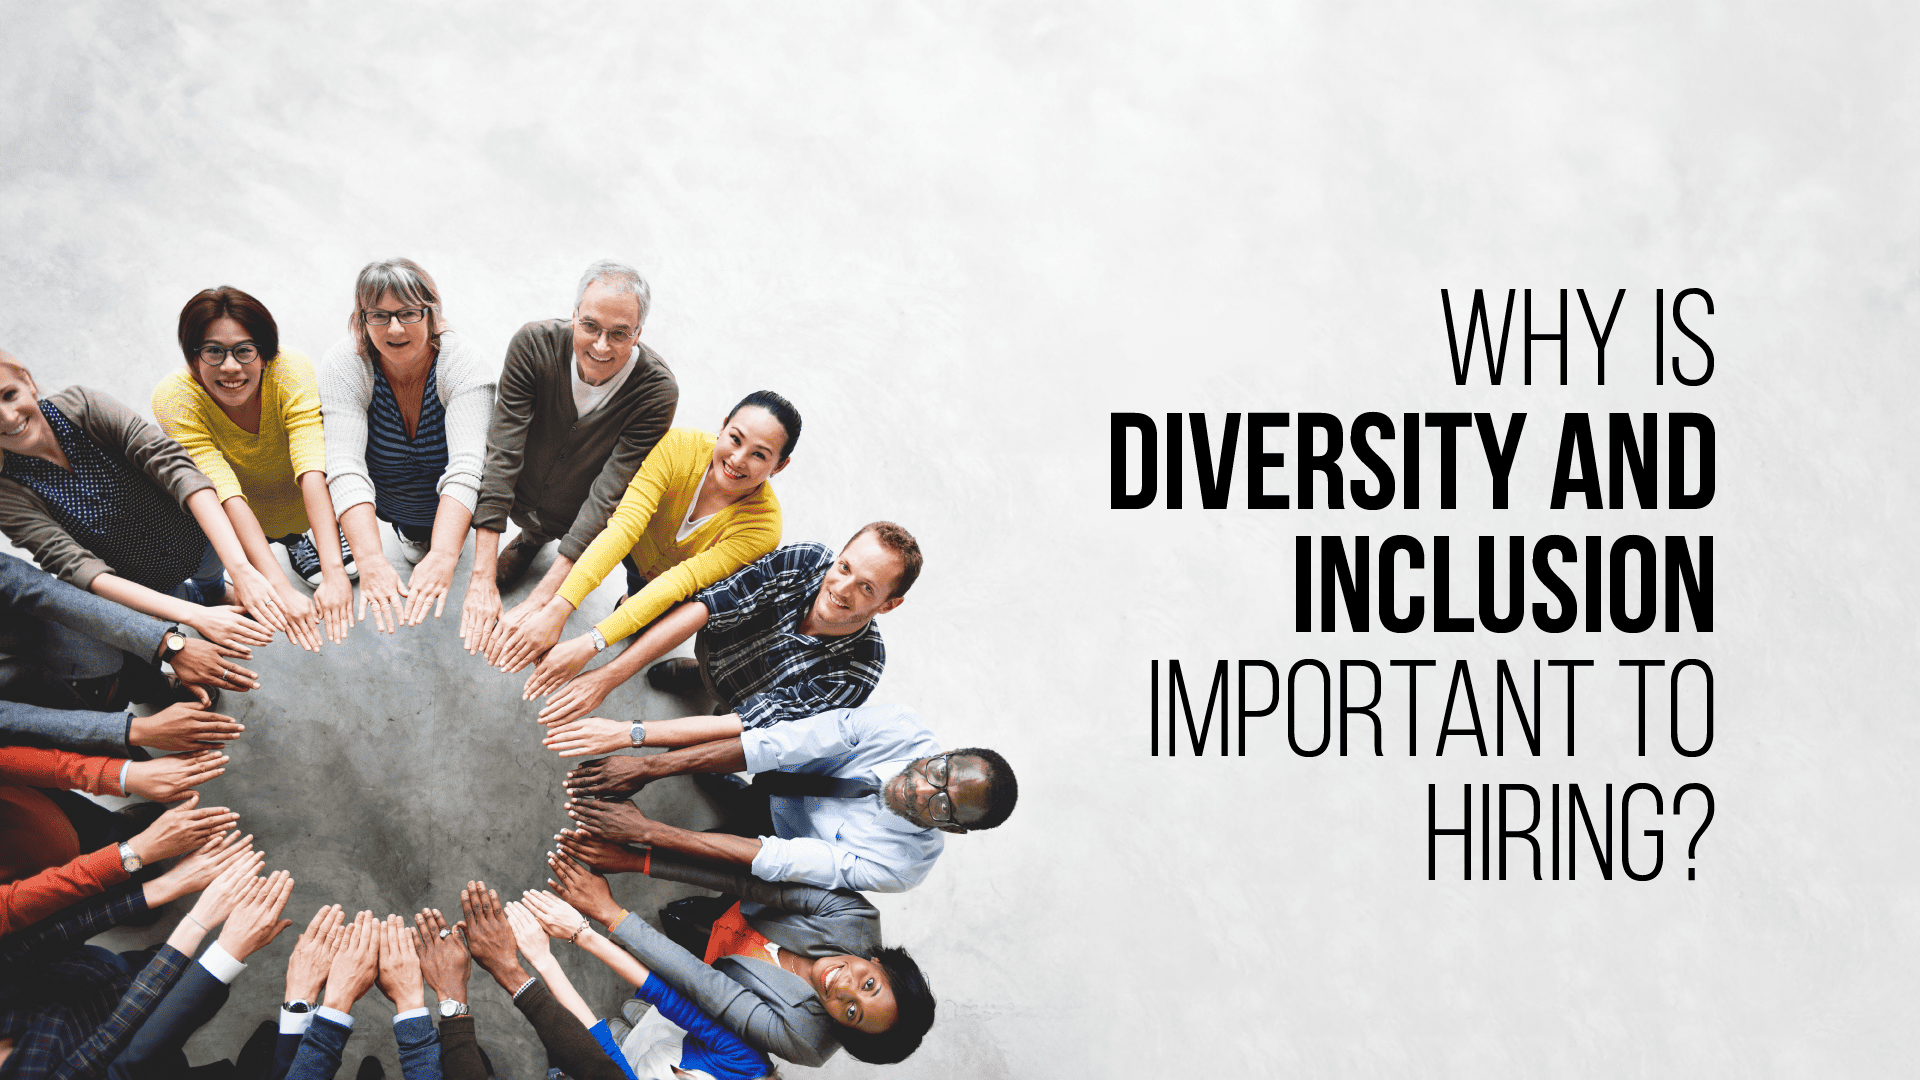 Why is Diversity and Inclusion Important to Hiring?